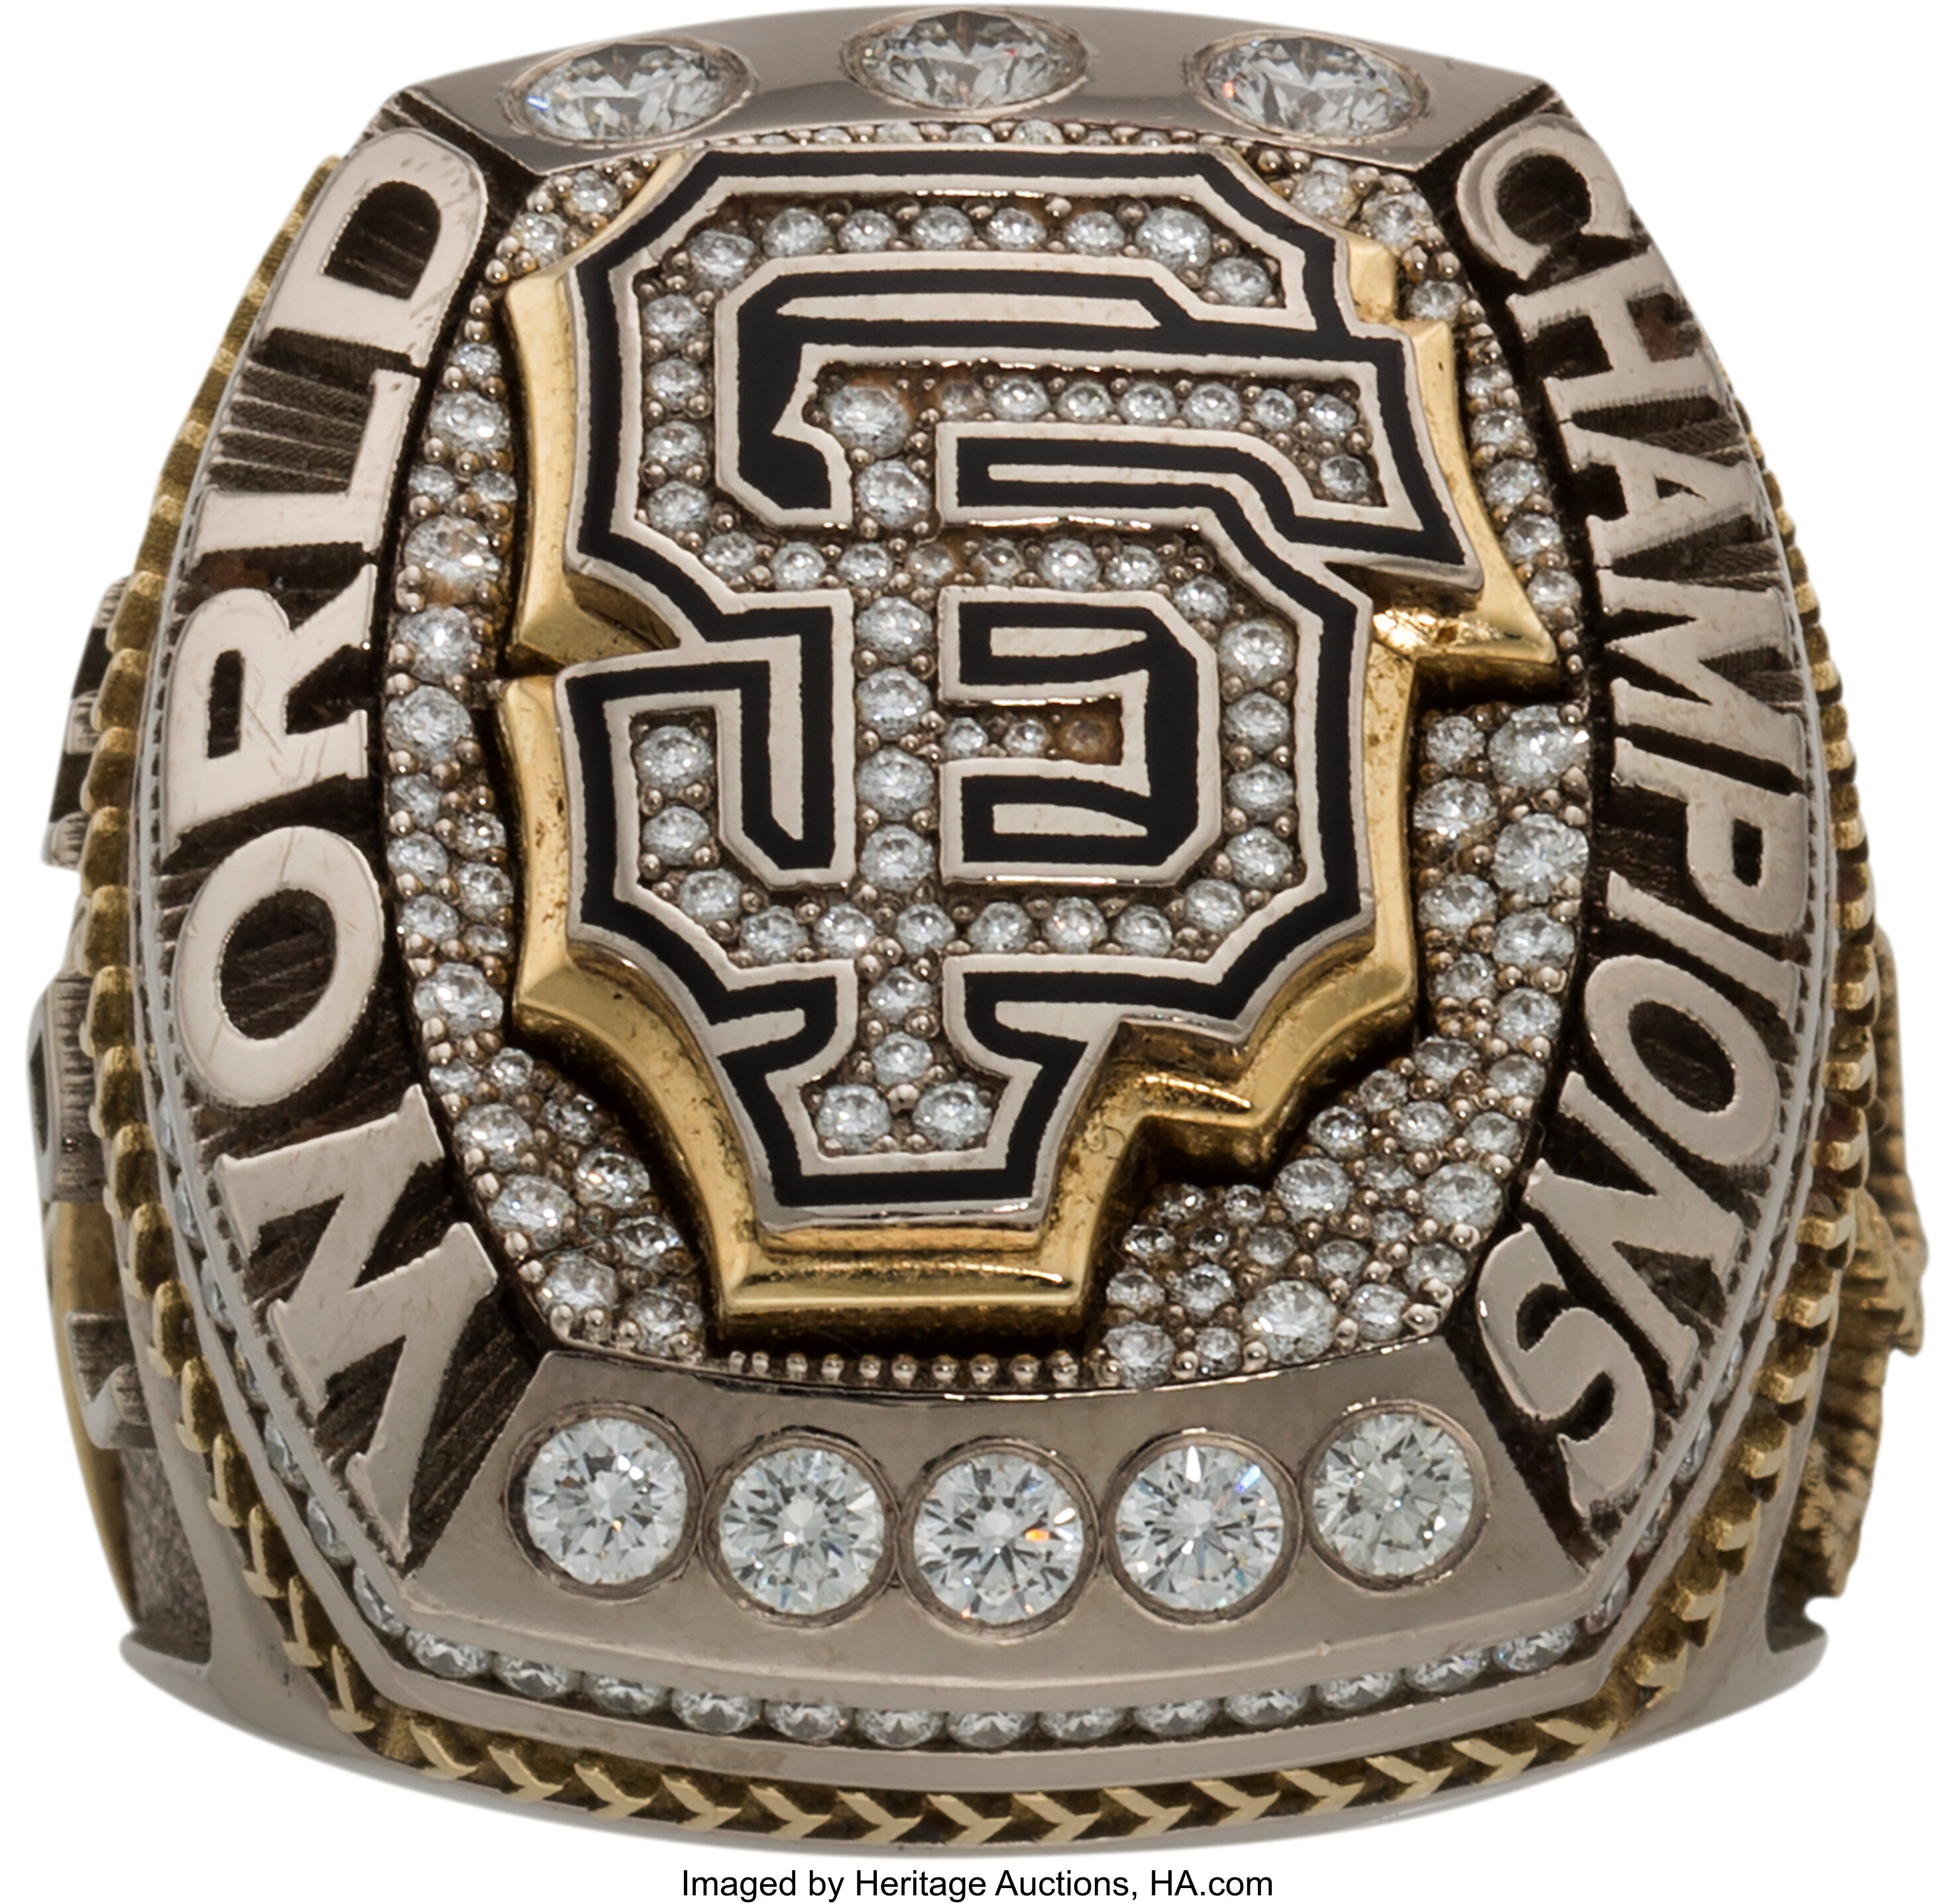 2012 San Francisco Giants World Series Championship Ring in